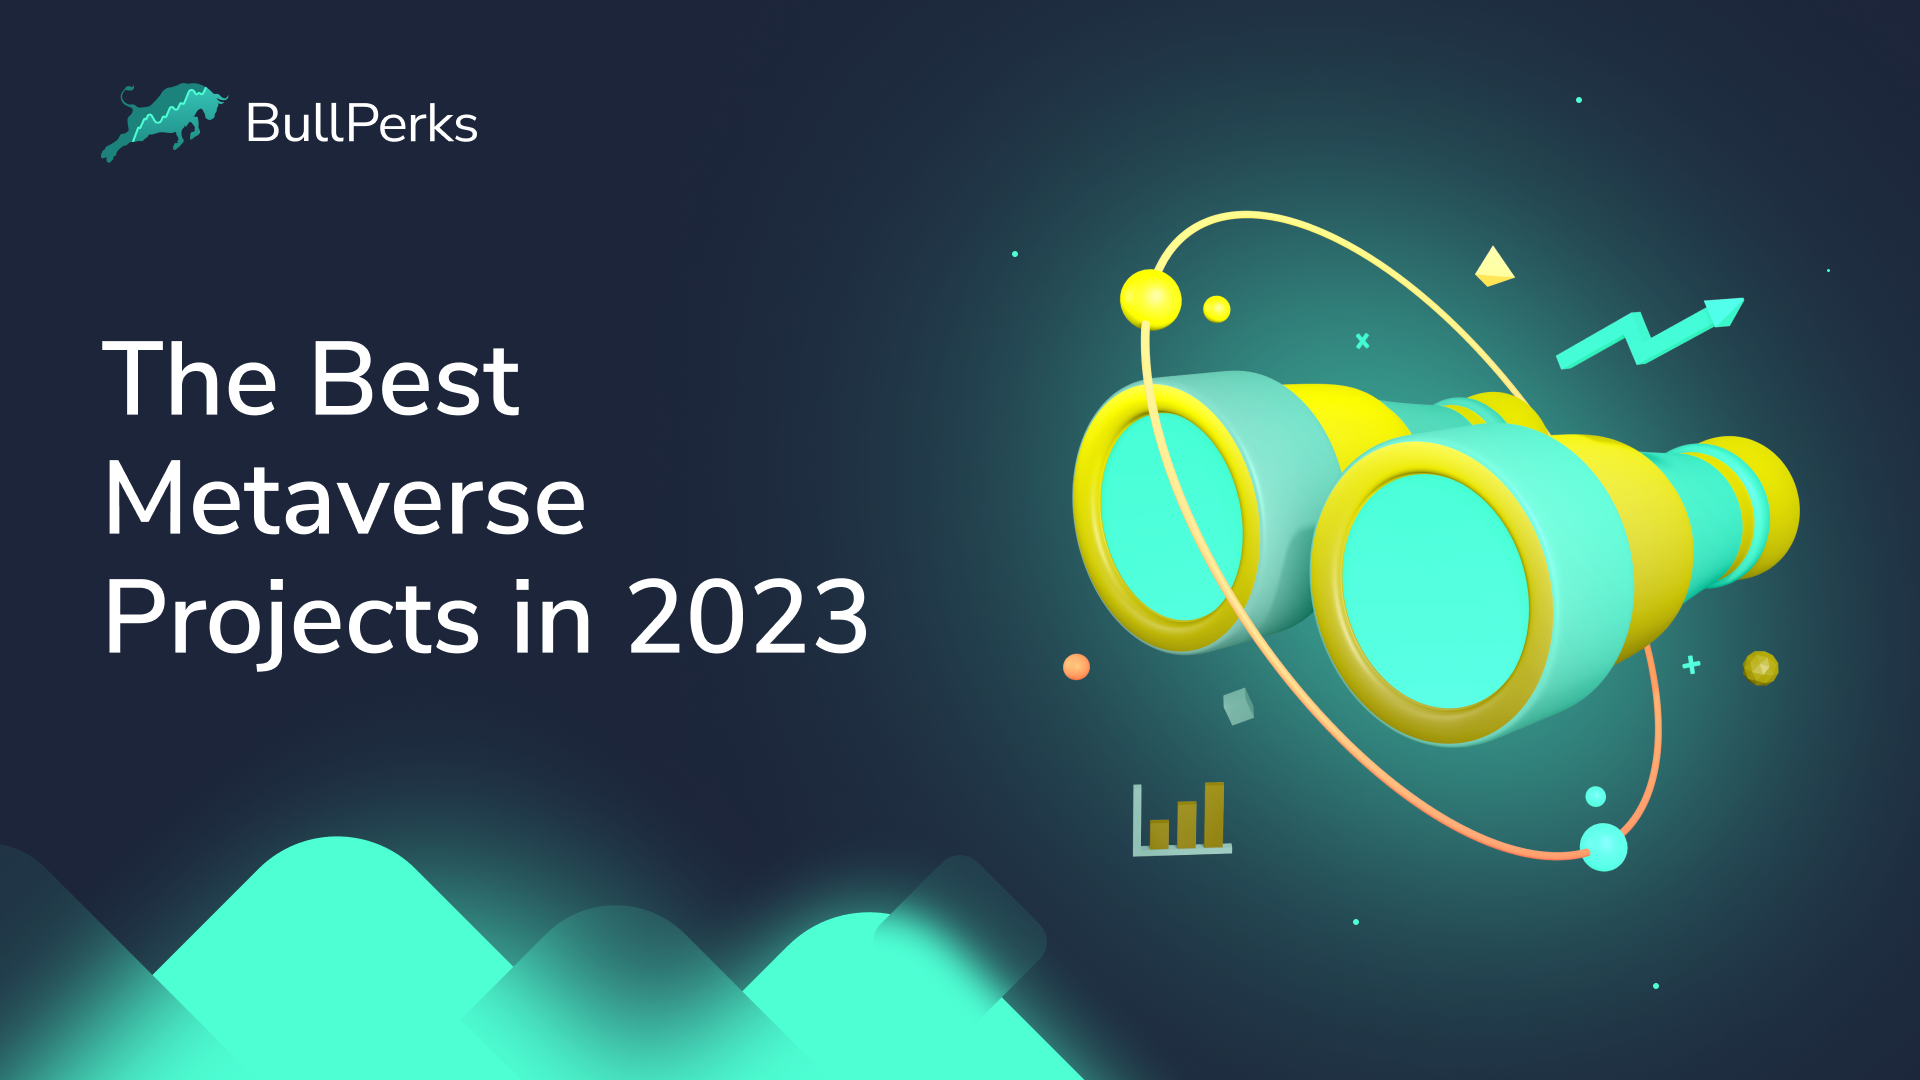 The Best Metaverse Projects in 2023 1 BullPerks